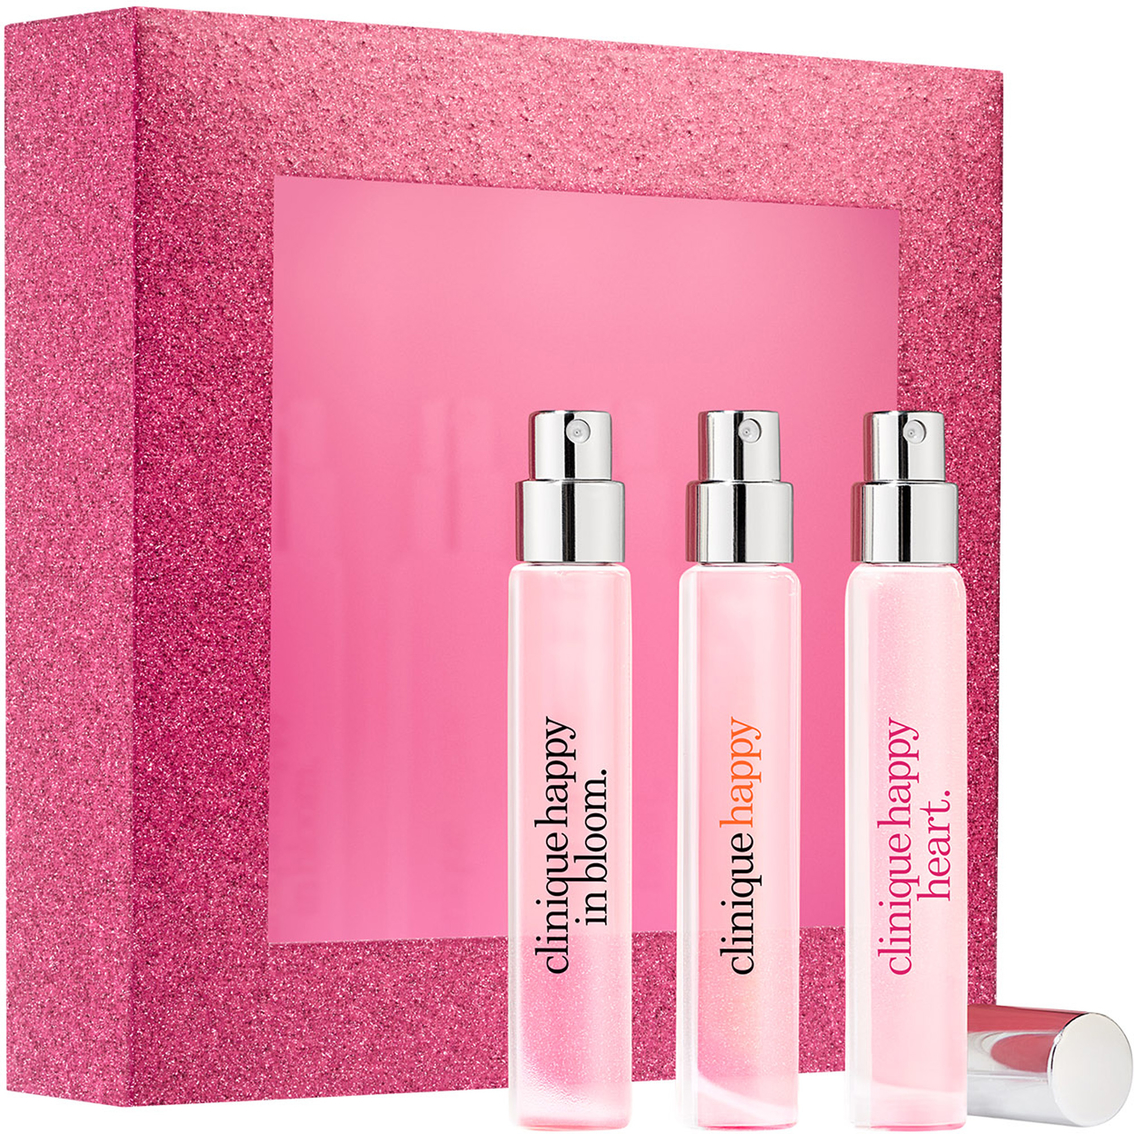 Clinique A Little Happiness Set | Gifts Sets For Her | Beauty & Health ...